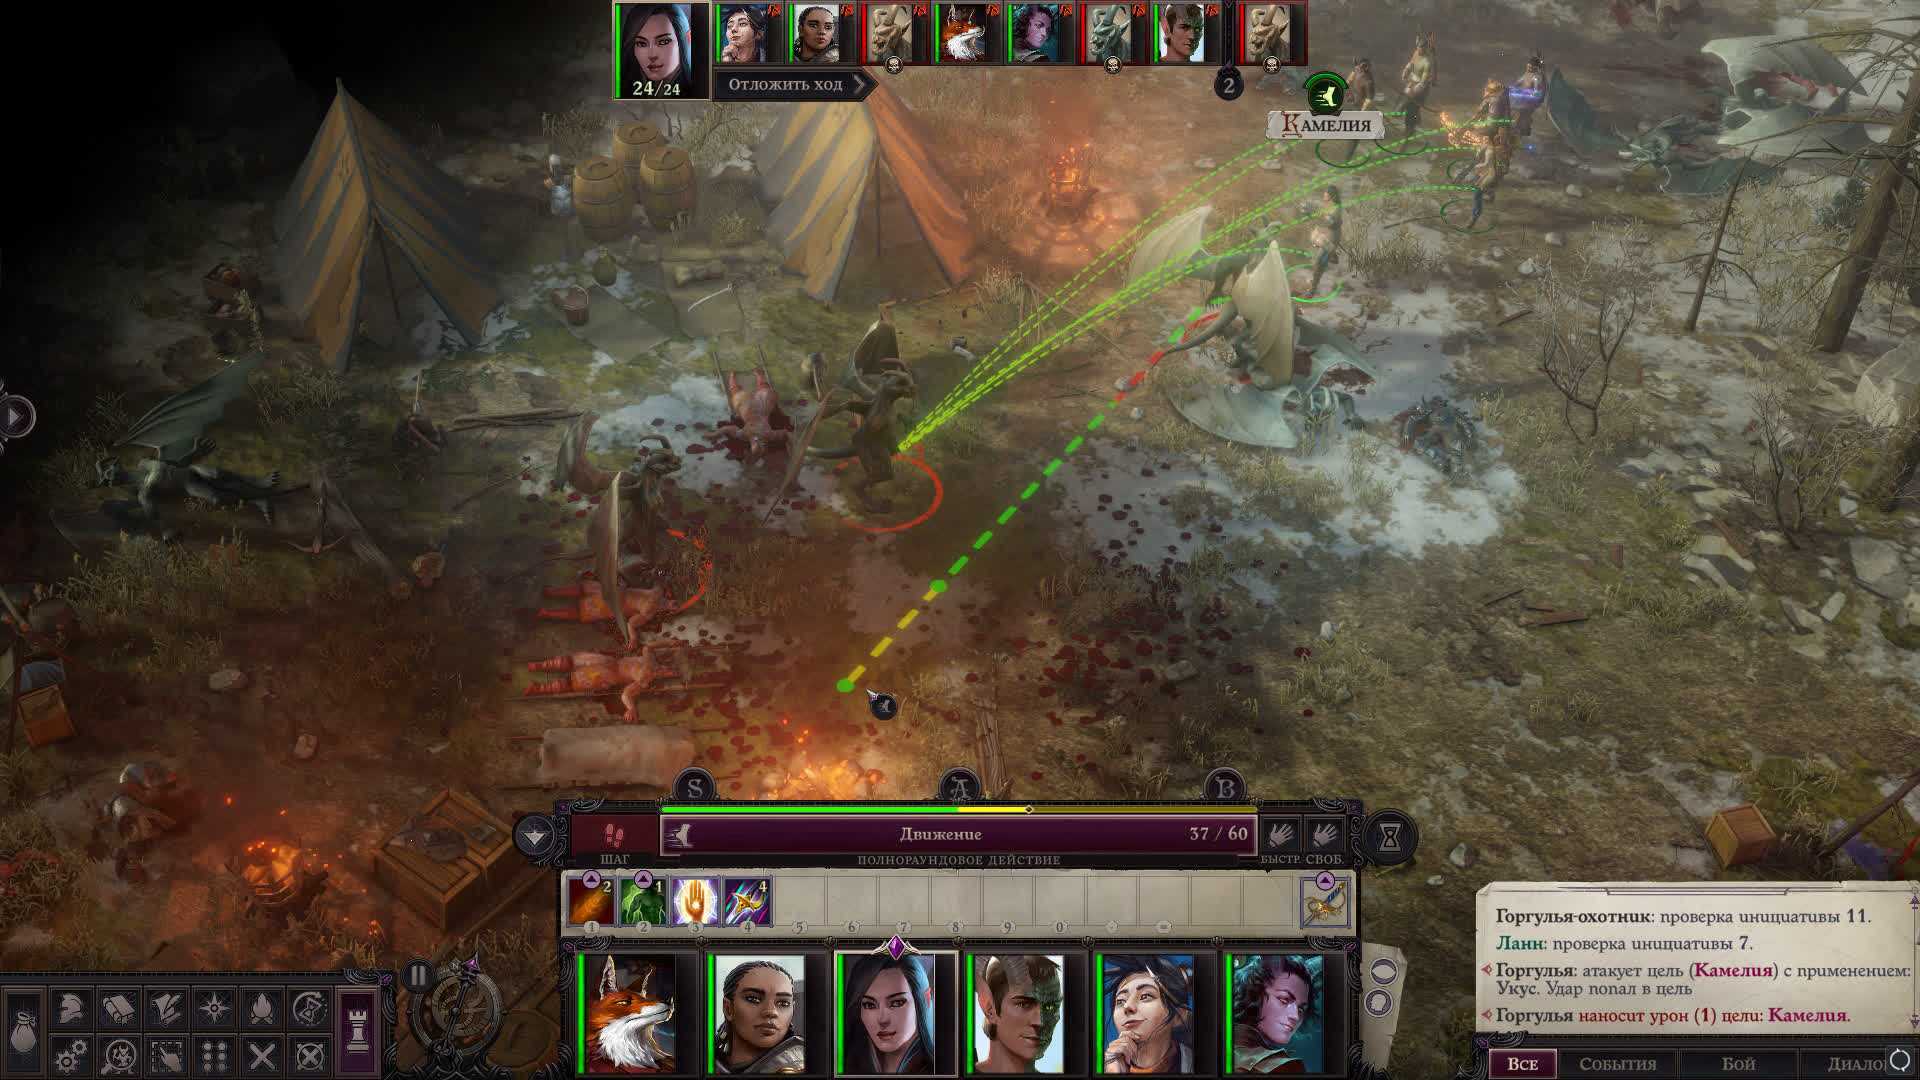 Pathfinder Wrath of the Righteous пошаговые бои. Pathfinder Kingmaker Wrath of the Righteous пик штормов. Pathfinder Wrath of the Righteous Art. Pathfinder Wrath show relationship changes Mod. Камелия pathfinder wrath